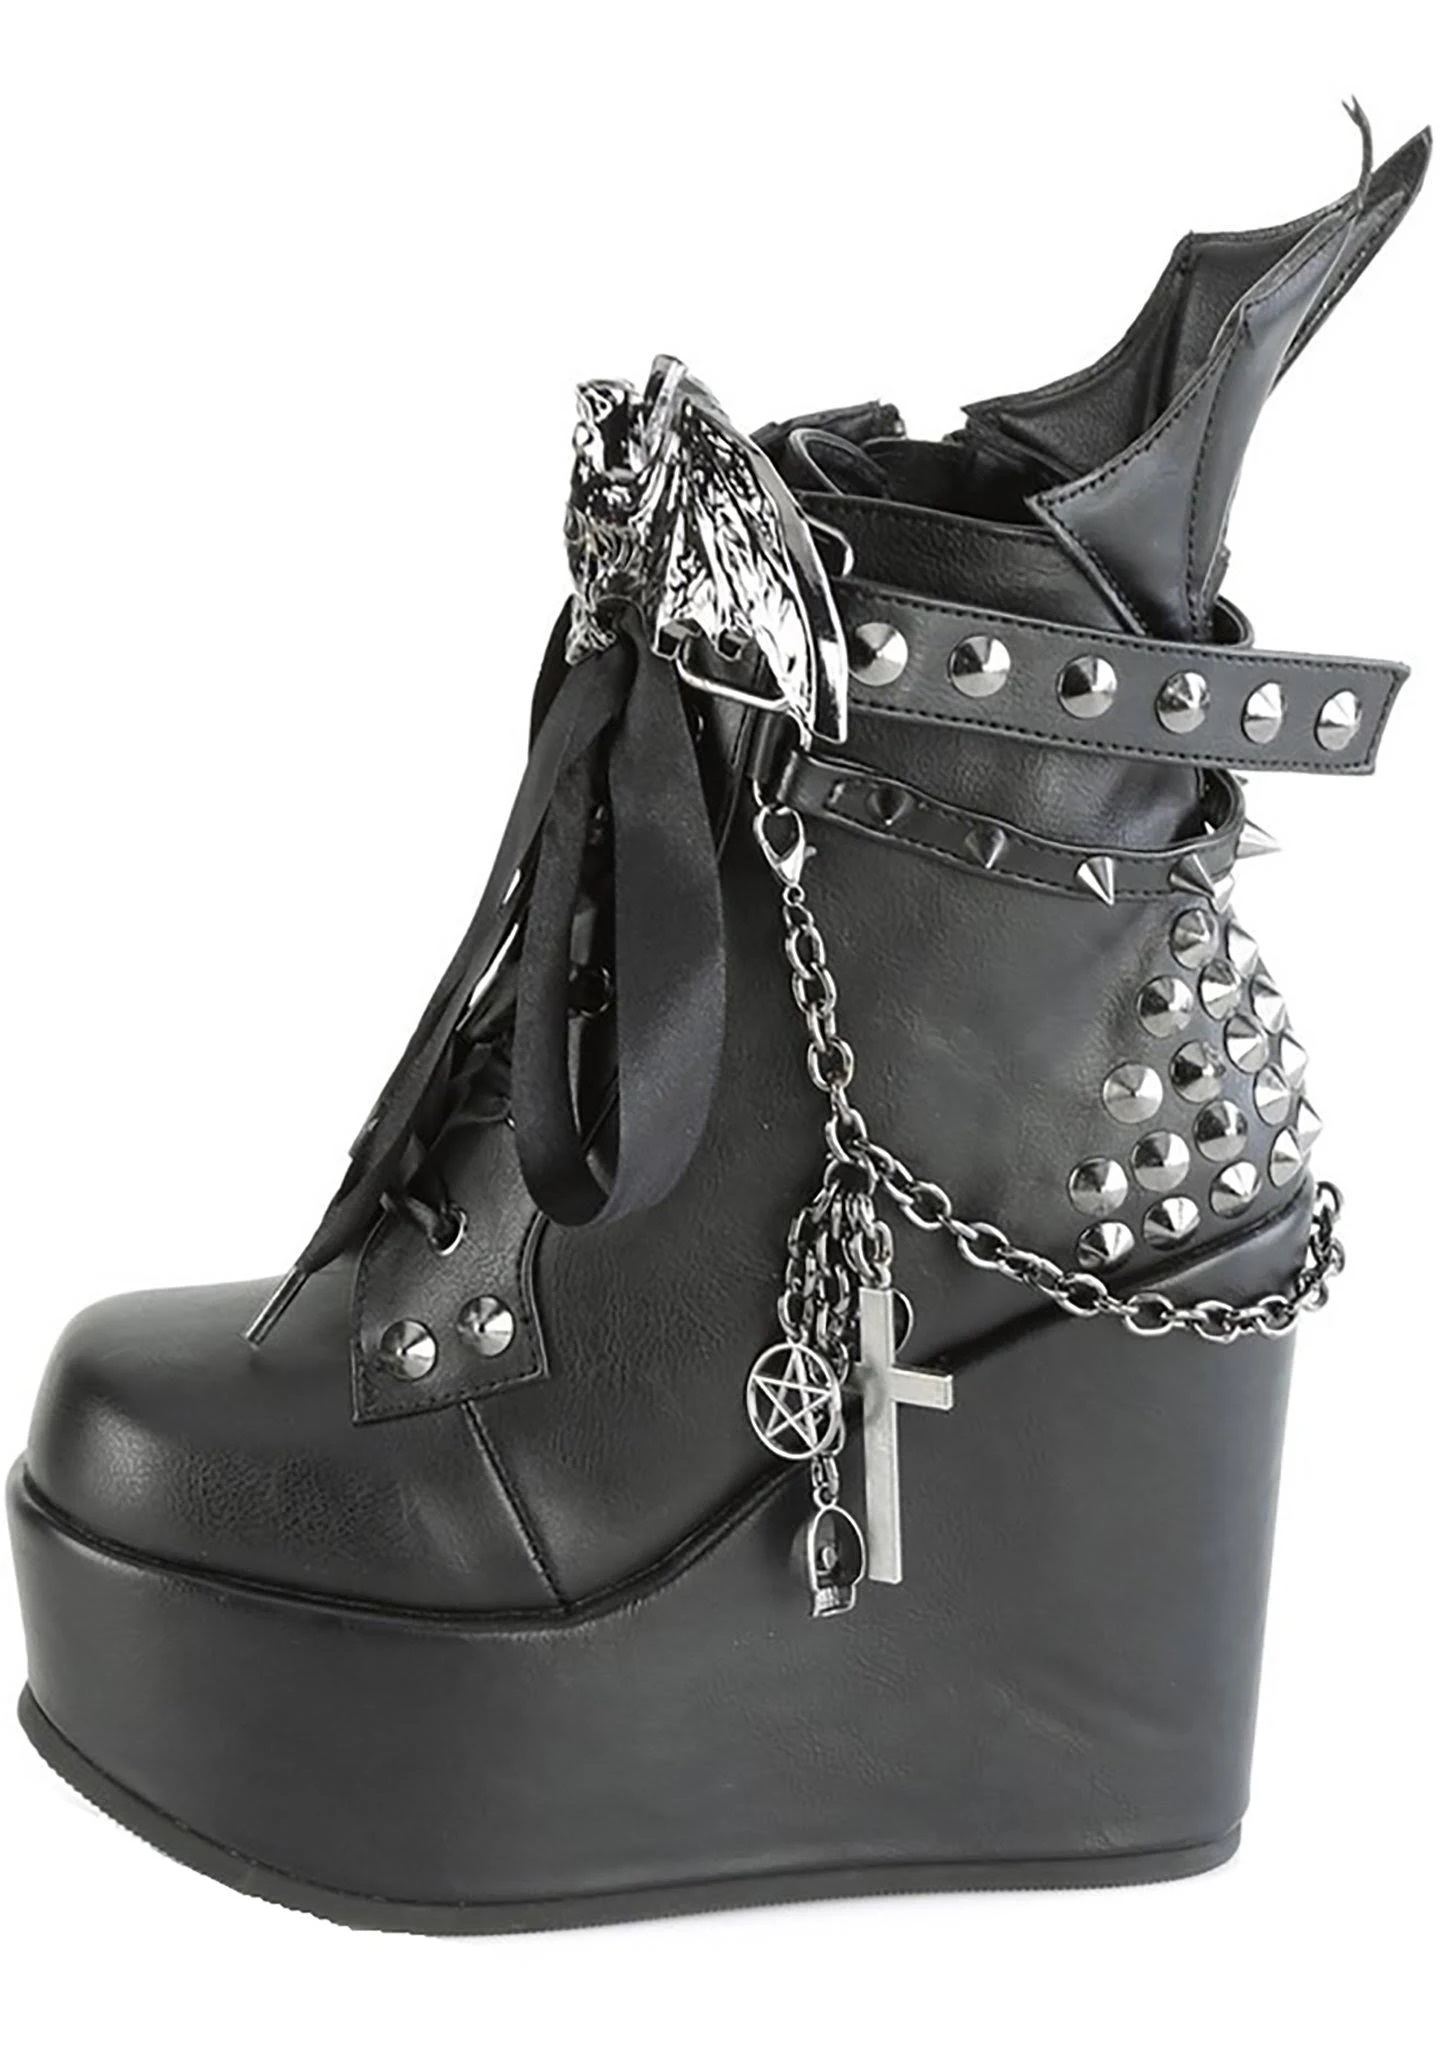 Poison-107 Wedge Platform Ankle Bootie - Screamers Costumes